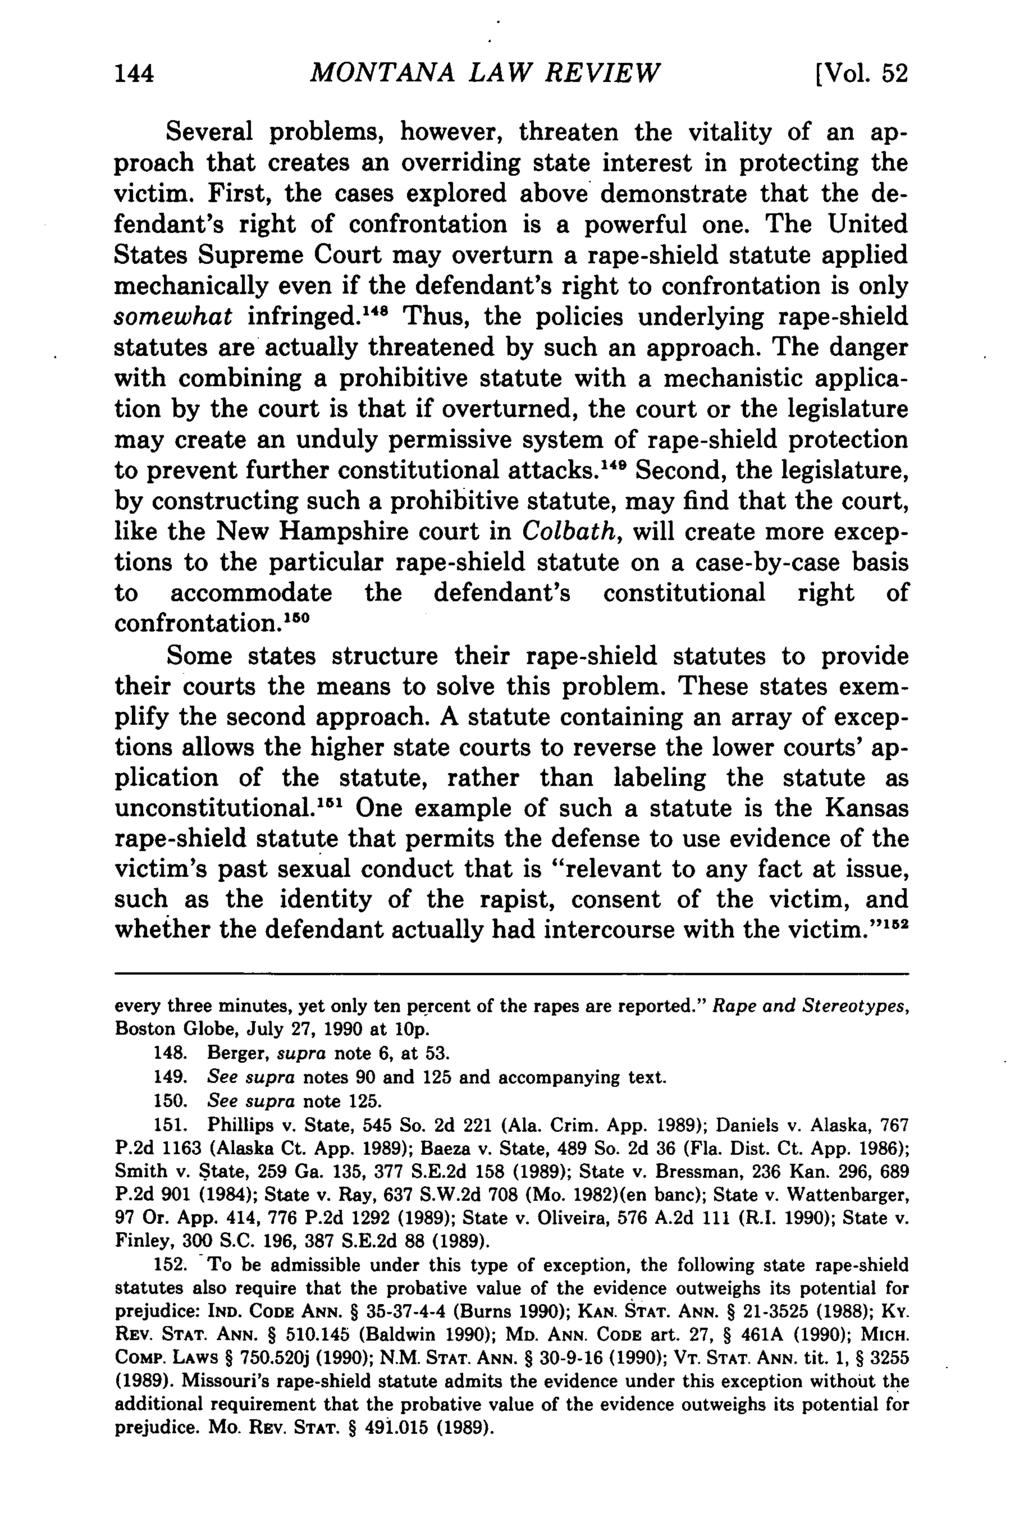 144 Montana Law Review, Vol. 52 [1991], Iss. 1, Art. 8 MONTANA LAW REVIEW [Vol.